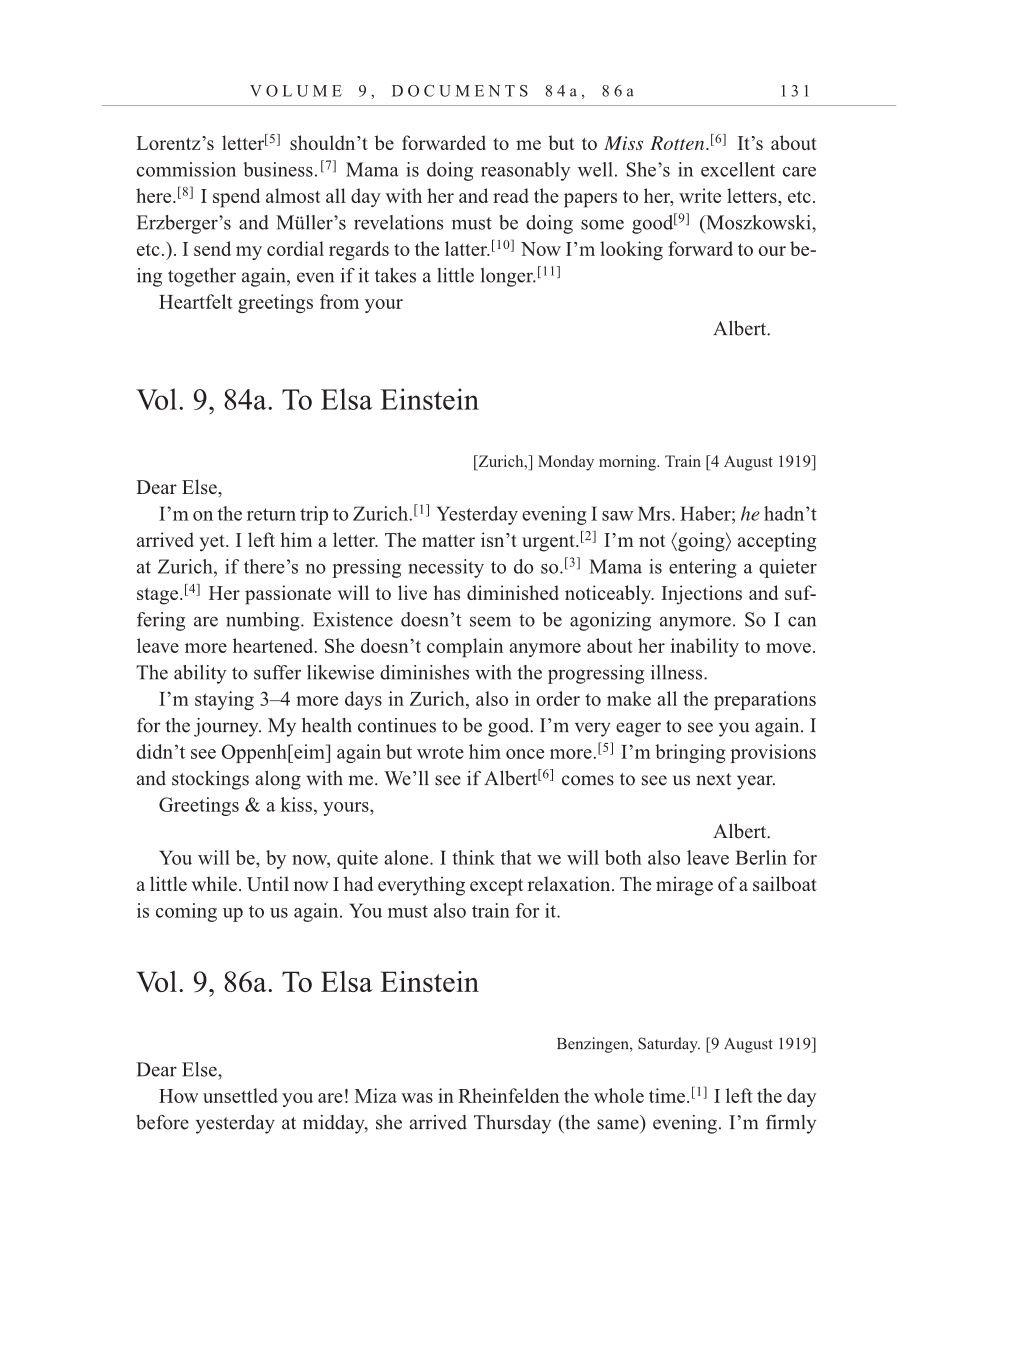 Volume 10: The Berlin Years: Correspondence, May-December 1920, and Supplementary Correspondence, 1909-1920 (English translation supplement) page 131